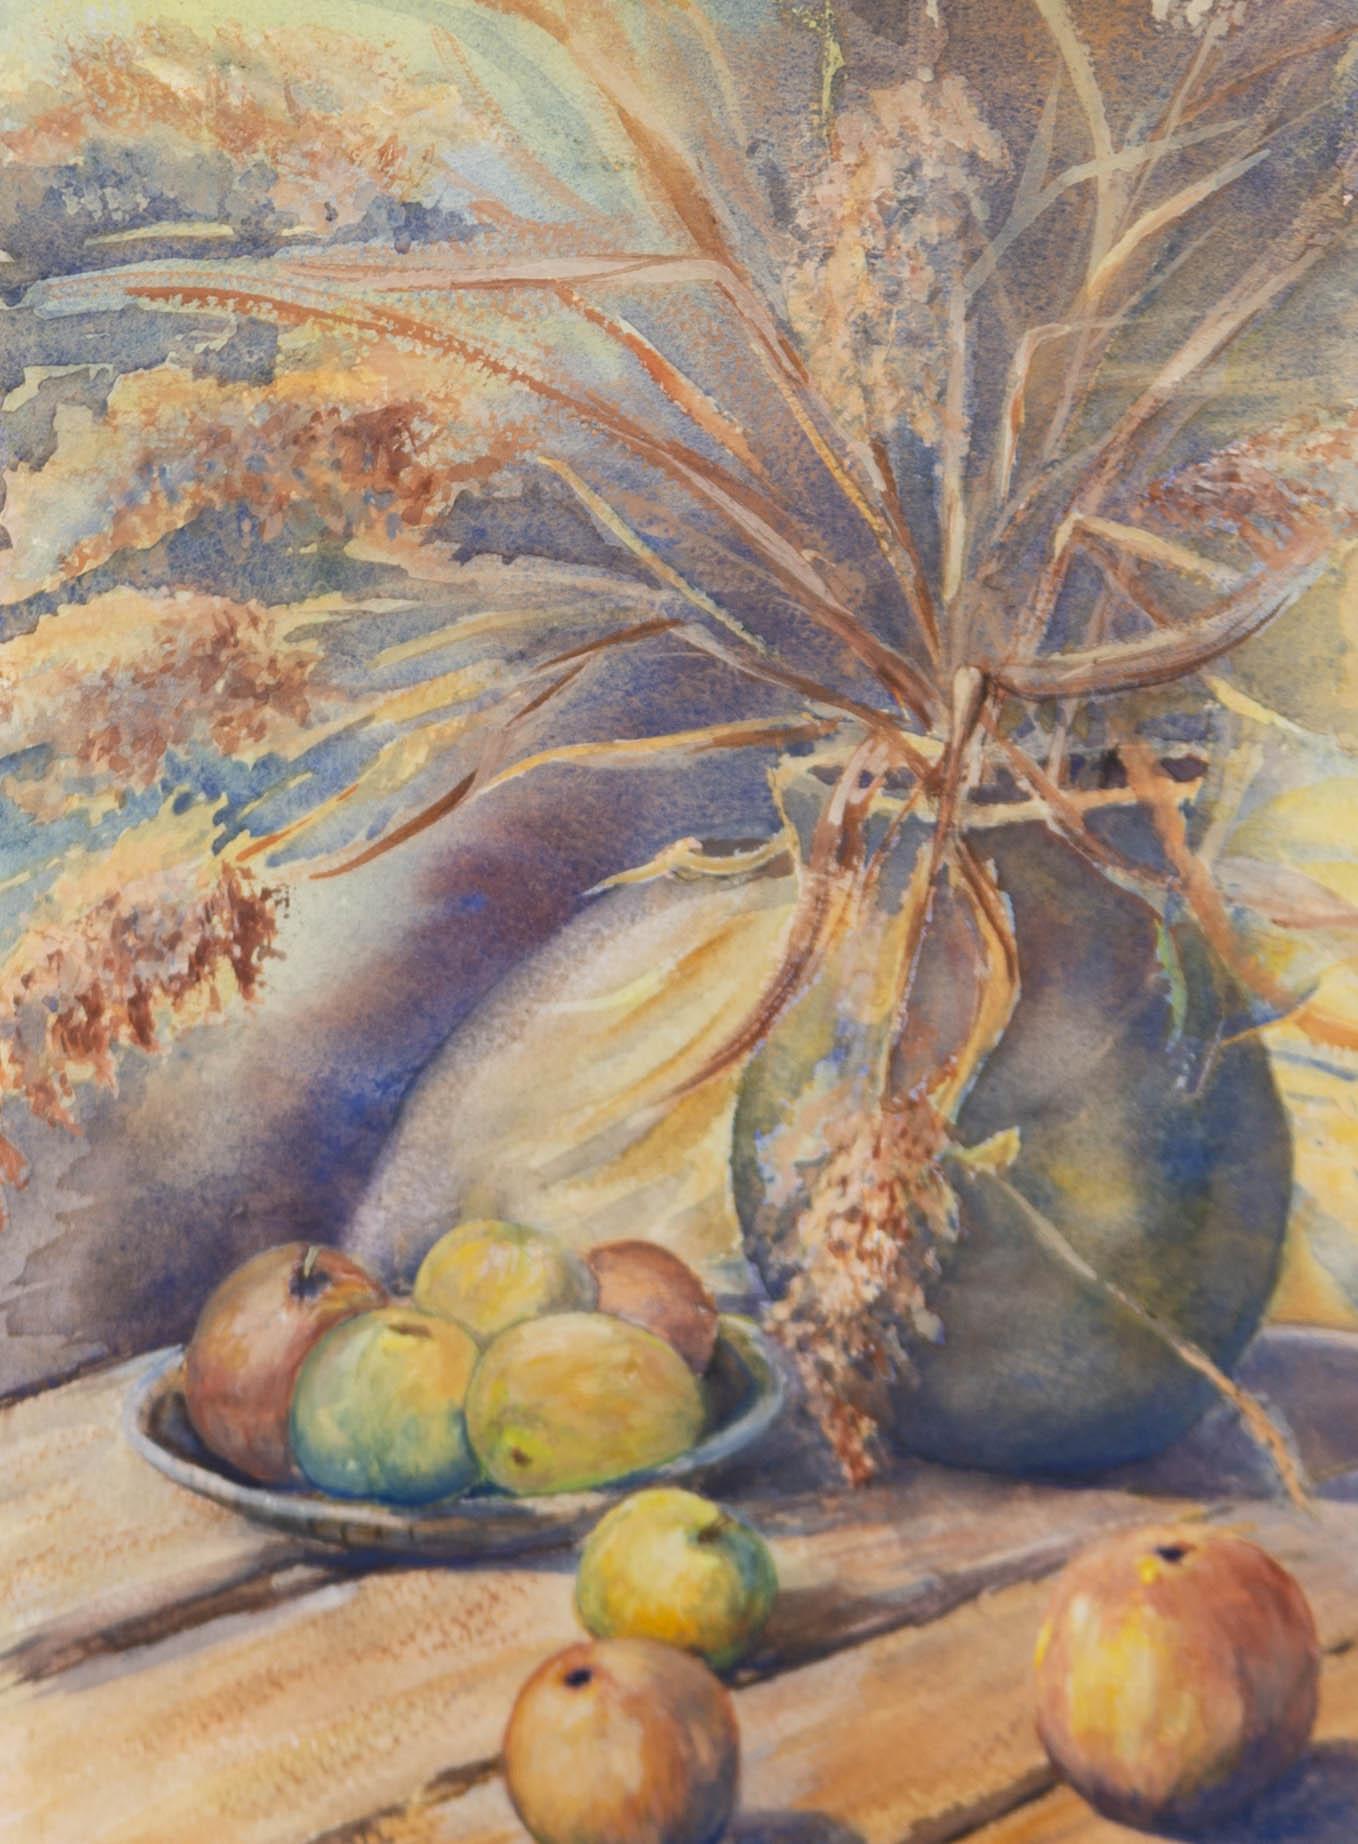 Basil E. Pursall - 20th Century Watercolour, Flower Vase and Apples - Art by Unknown